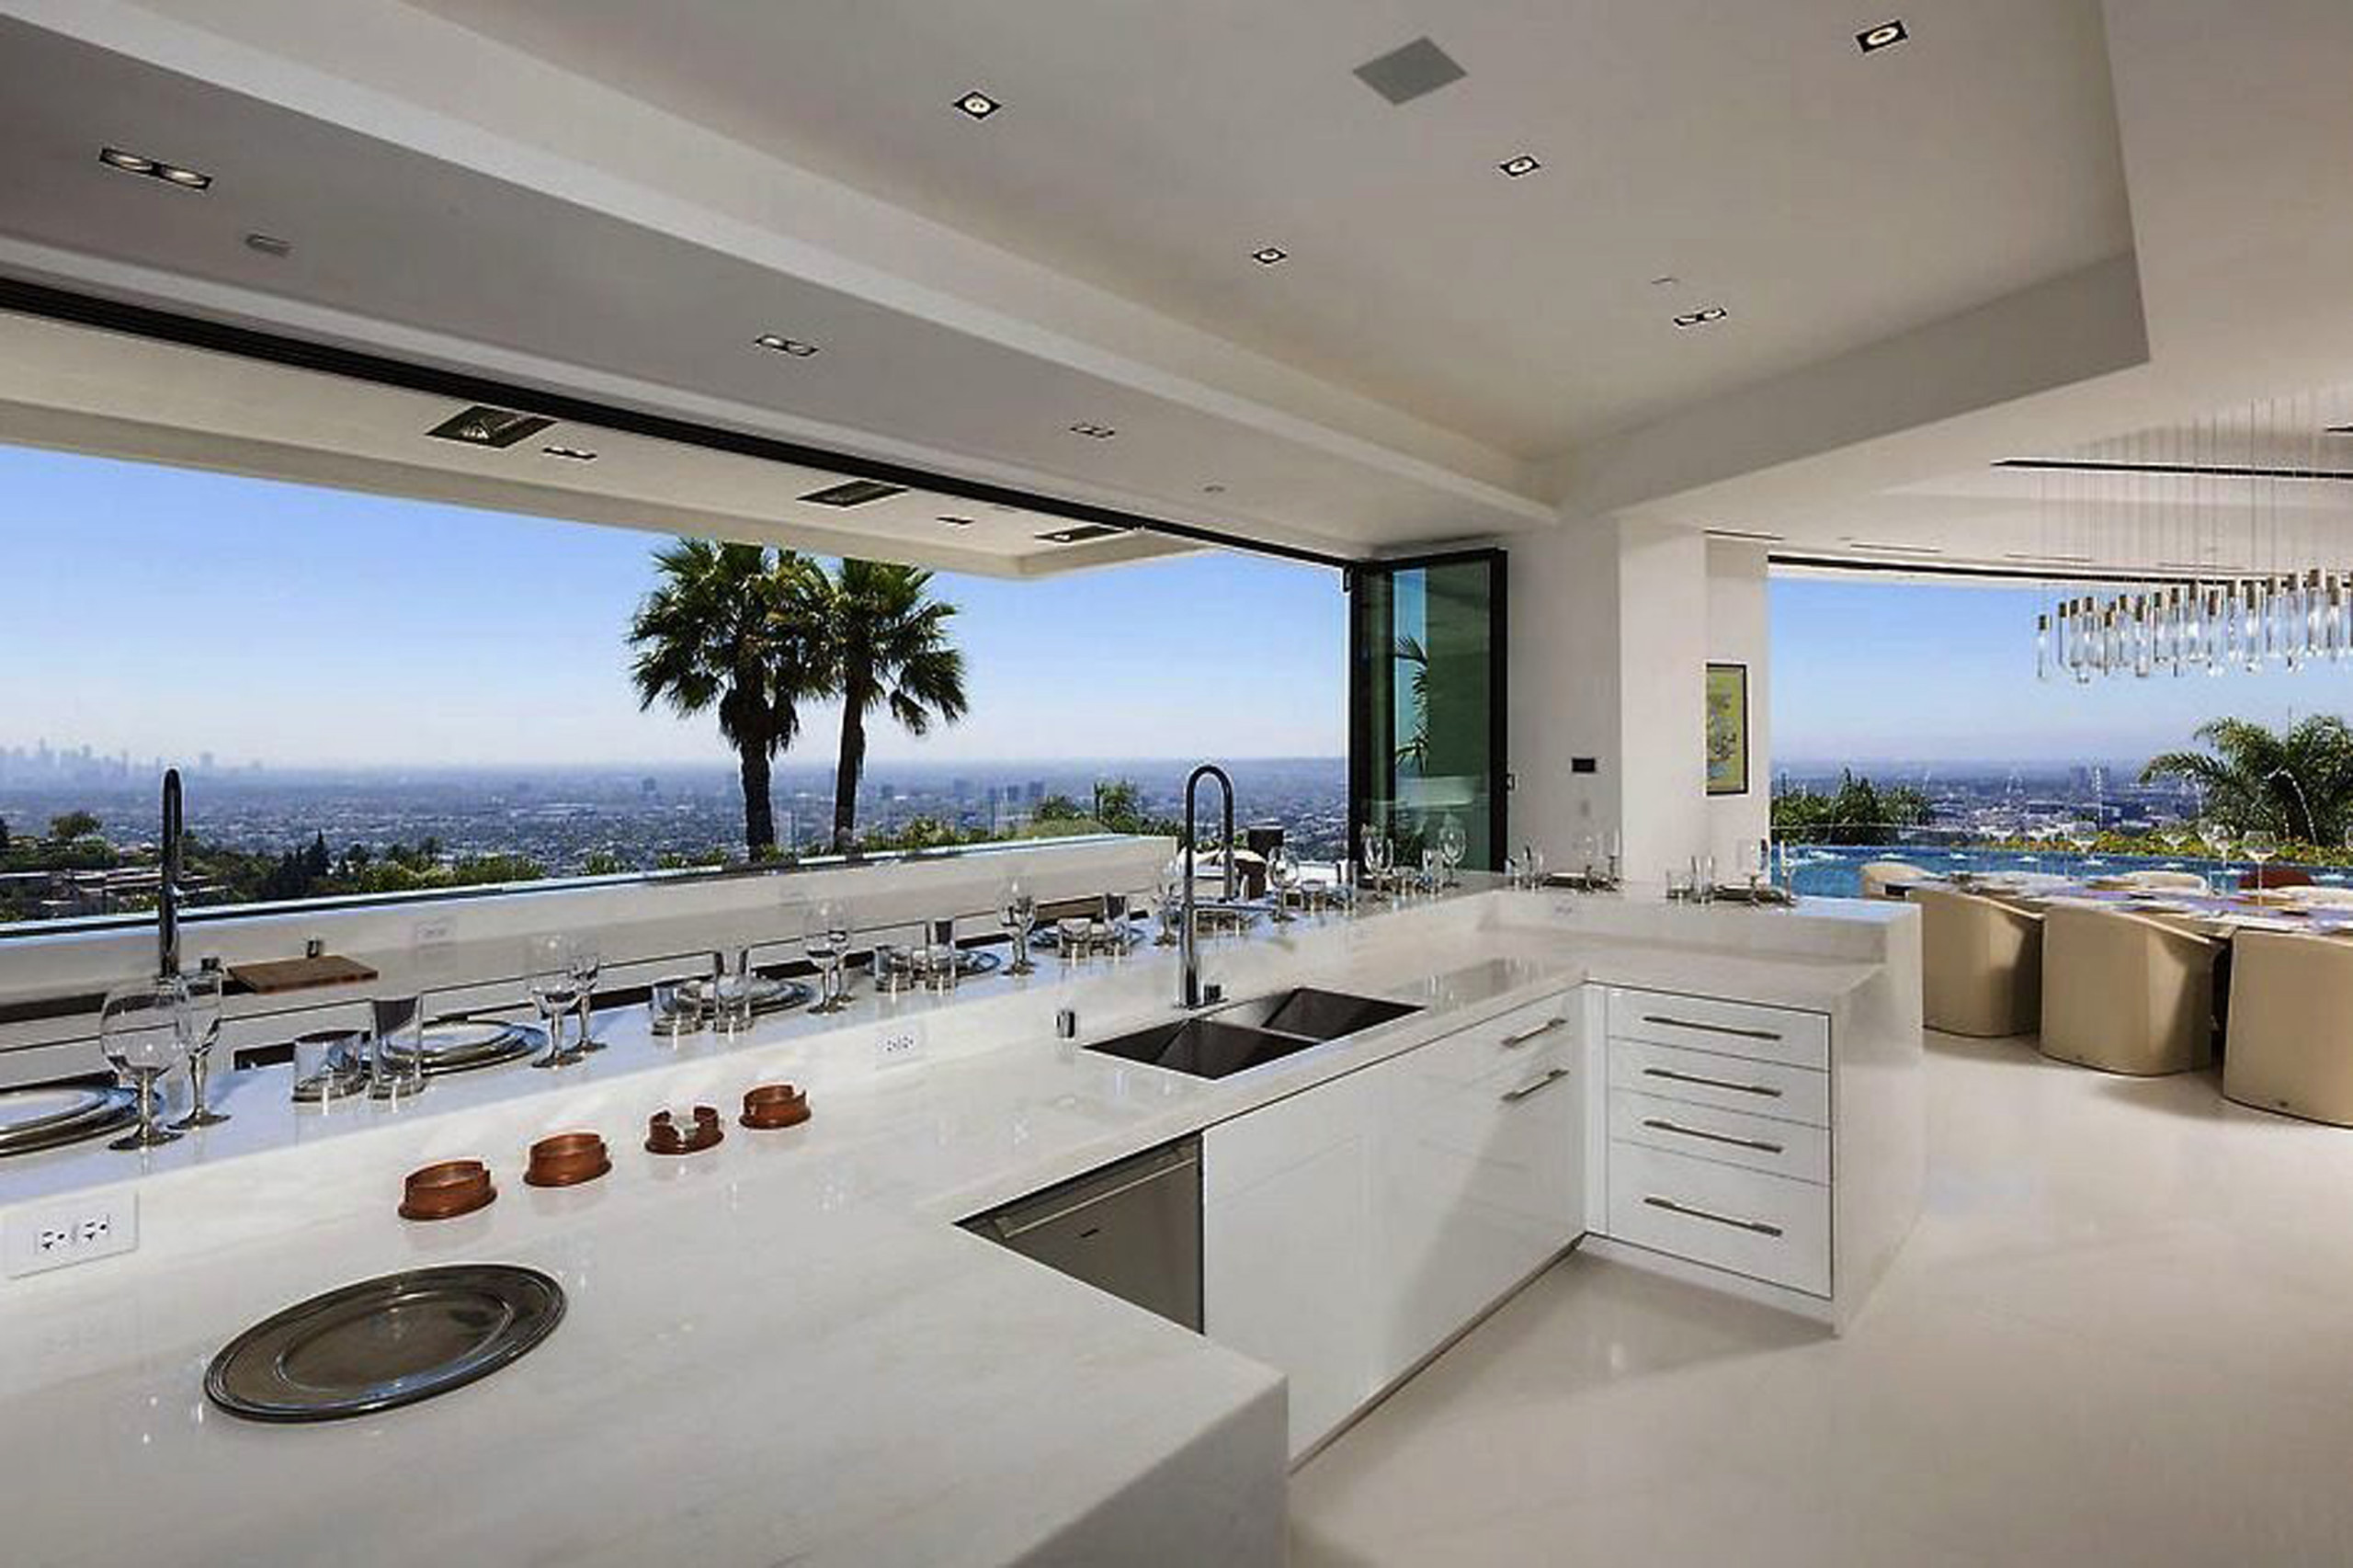 My Contemporary Kitchen Design for a large home at 1181 Hillcrest Dr.,B.H. ,CA.